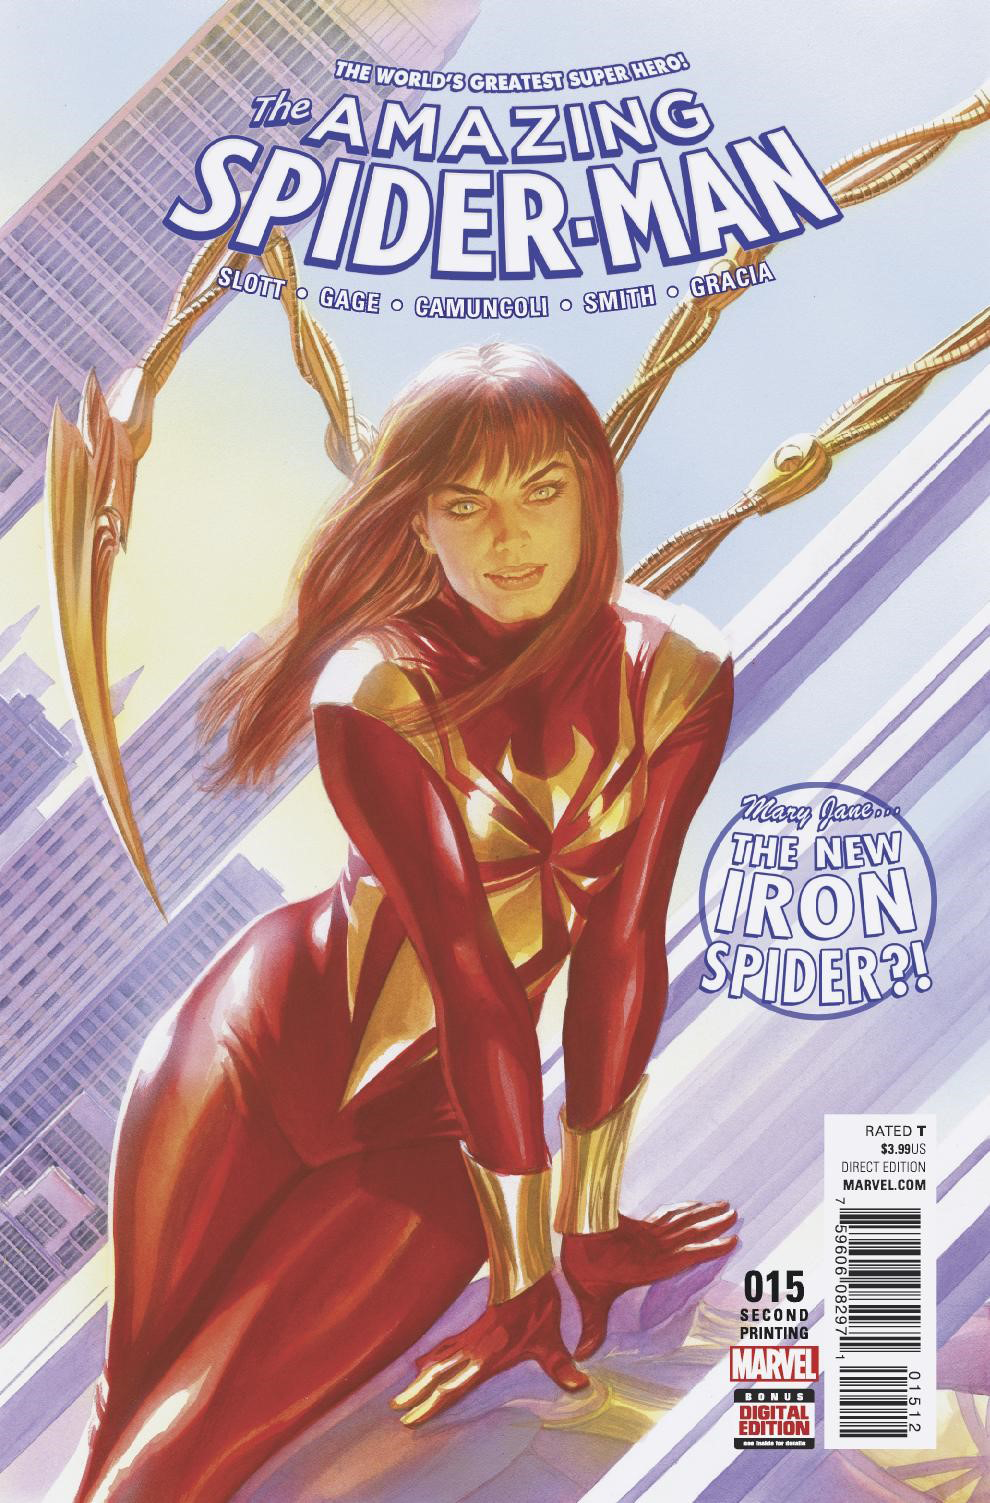 MAY169013 - AMAZING SPIDER-MAN #15 ALEX ROSS 2ND PTG VAR - Previews World